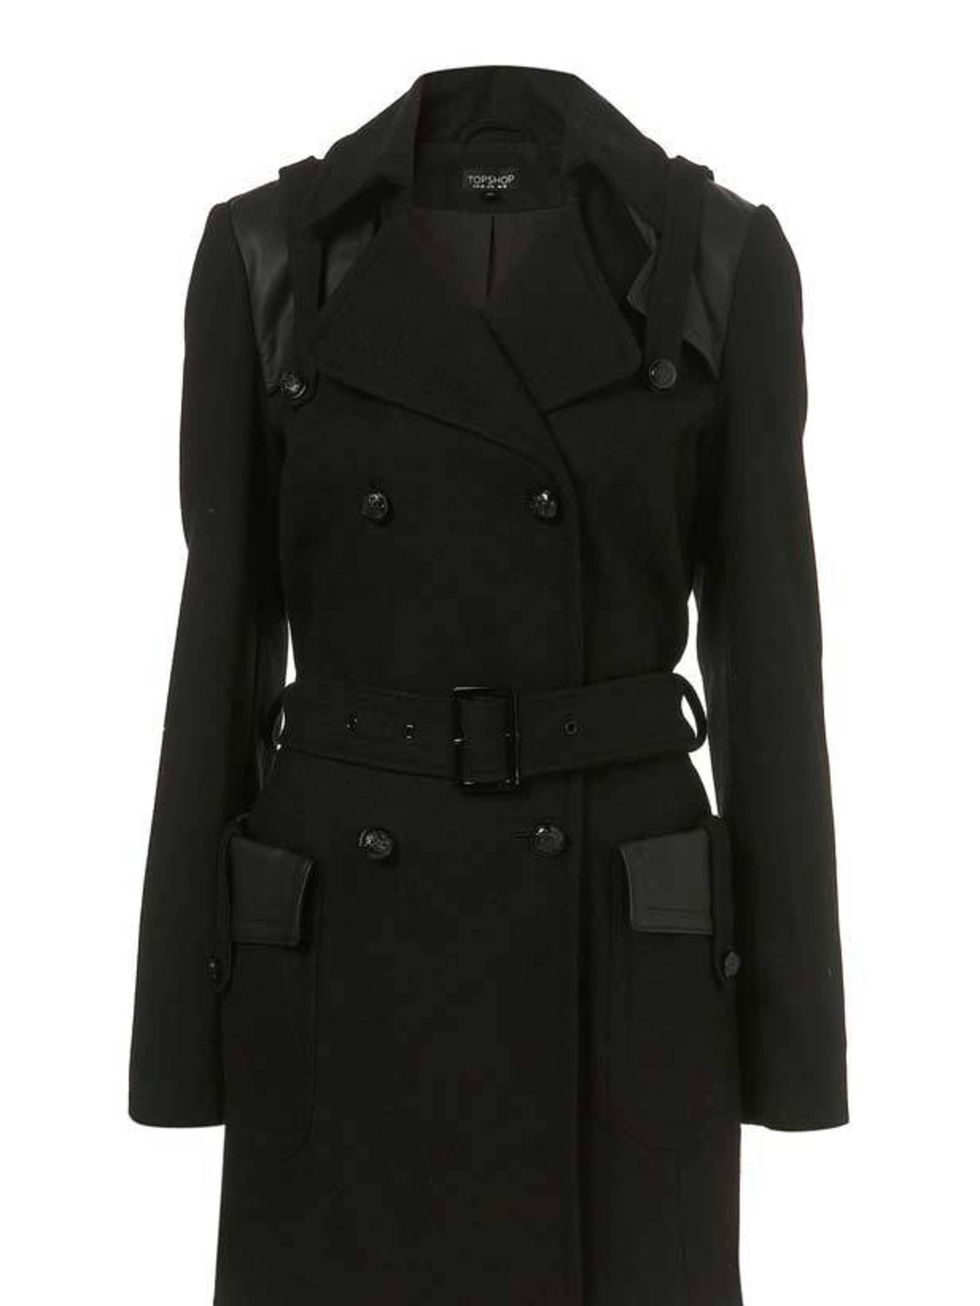 <p>Topshop military trench coat, £95, at <a href="http://www.topshop.com/webapp/wcs/stores/servlet/ProductDisplay?beginIndex=0&amp;viewAllFlag=&amp;catalogId=33057&amp;storeId=12556&amp;productId=2023818&amp;langId=-1&amp;sort_field=Relevance&amp;category